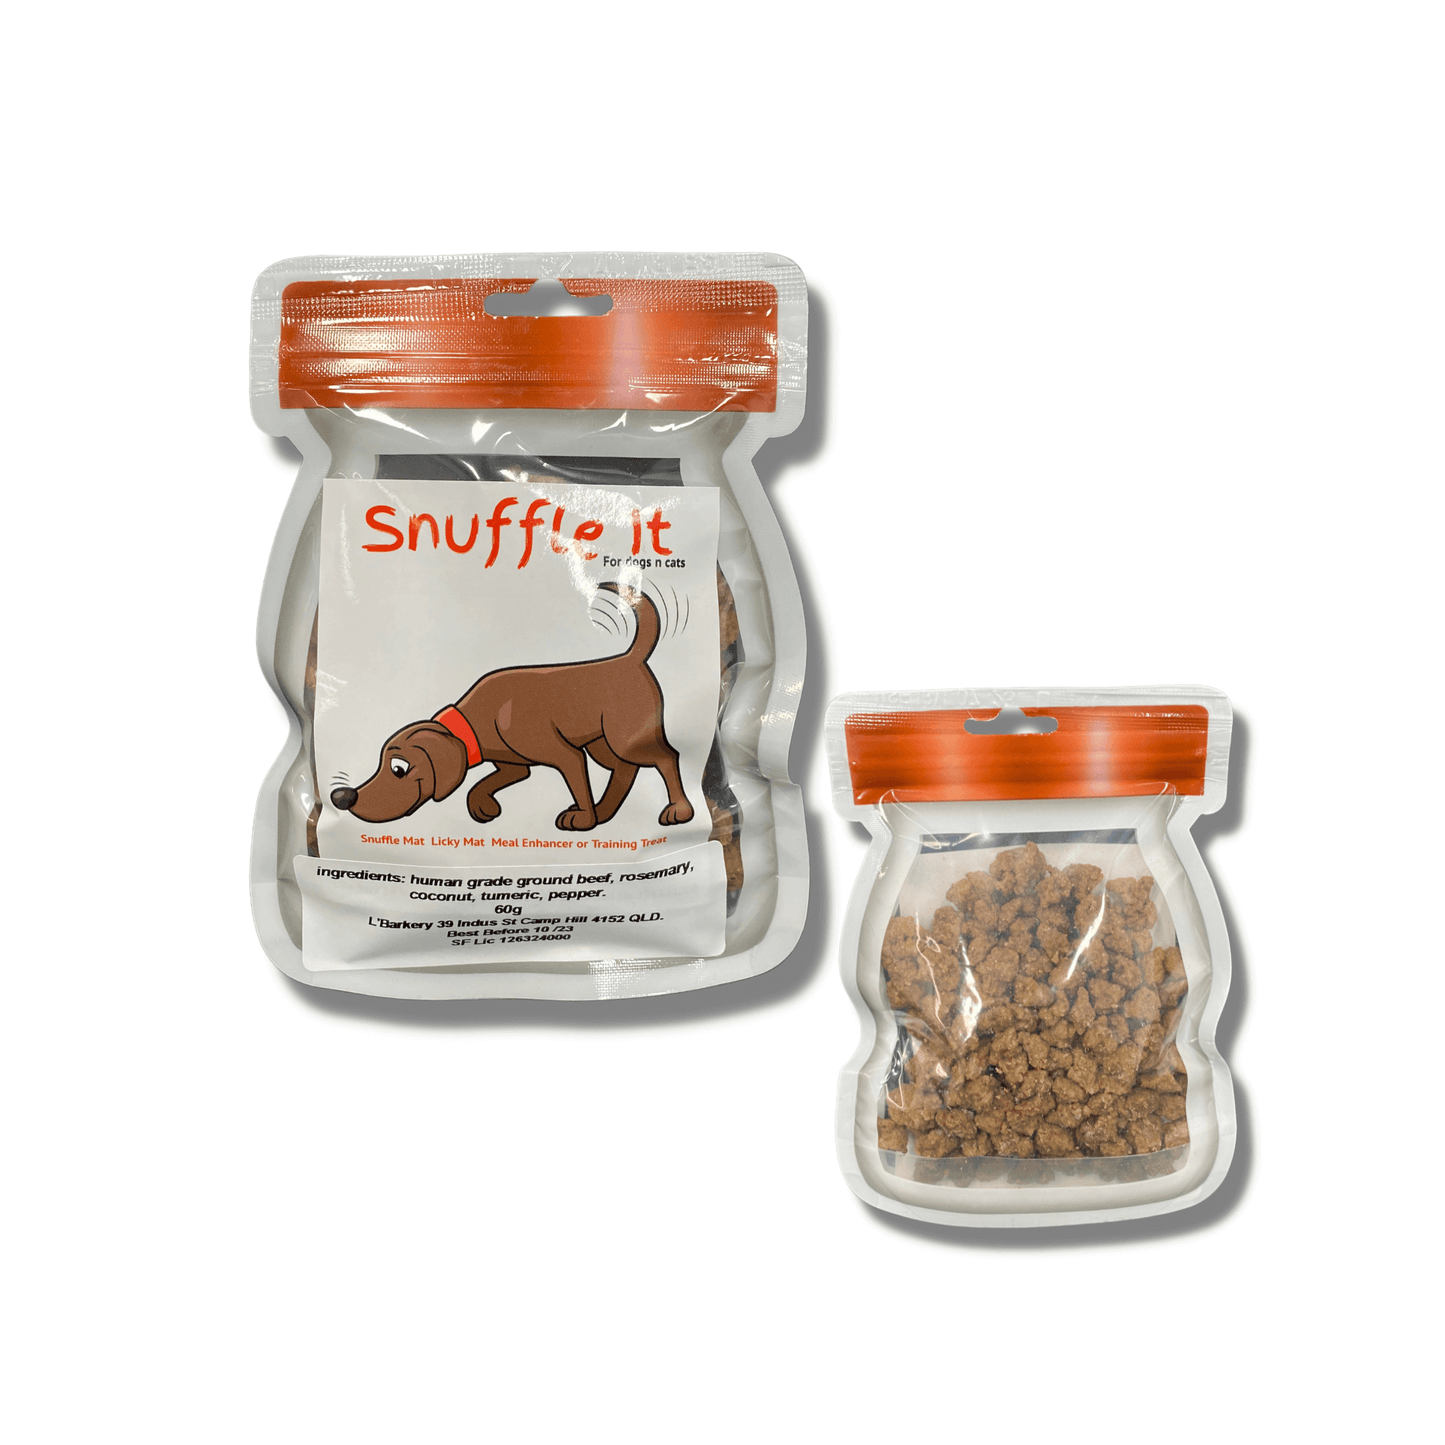 Beef mix snuffle mat mix, let's pawty